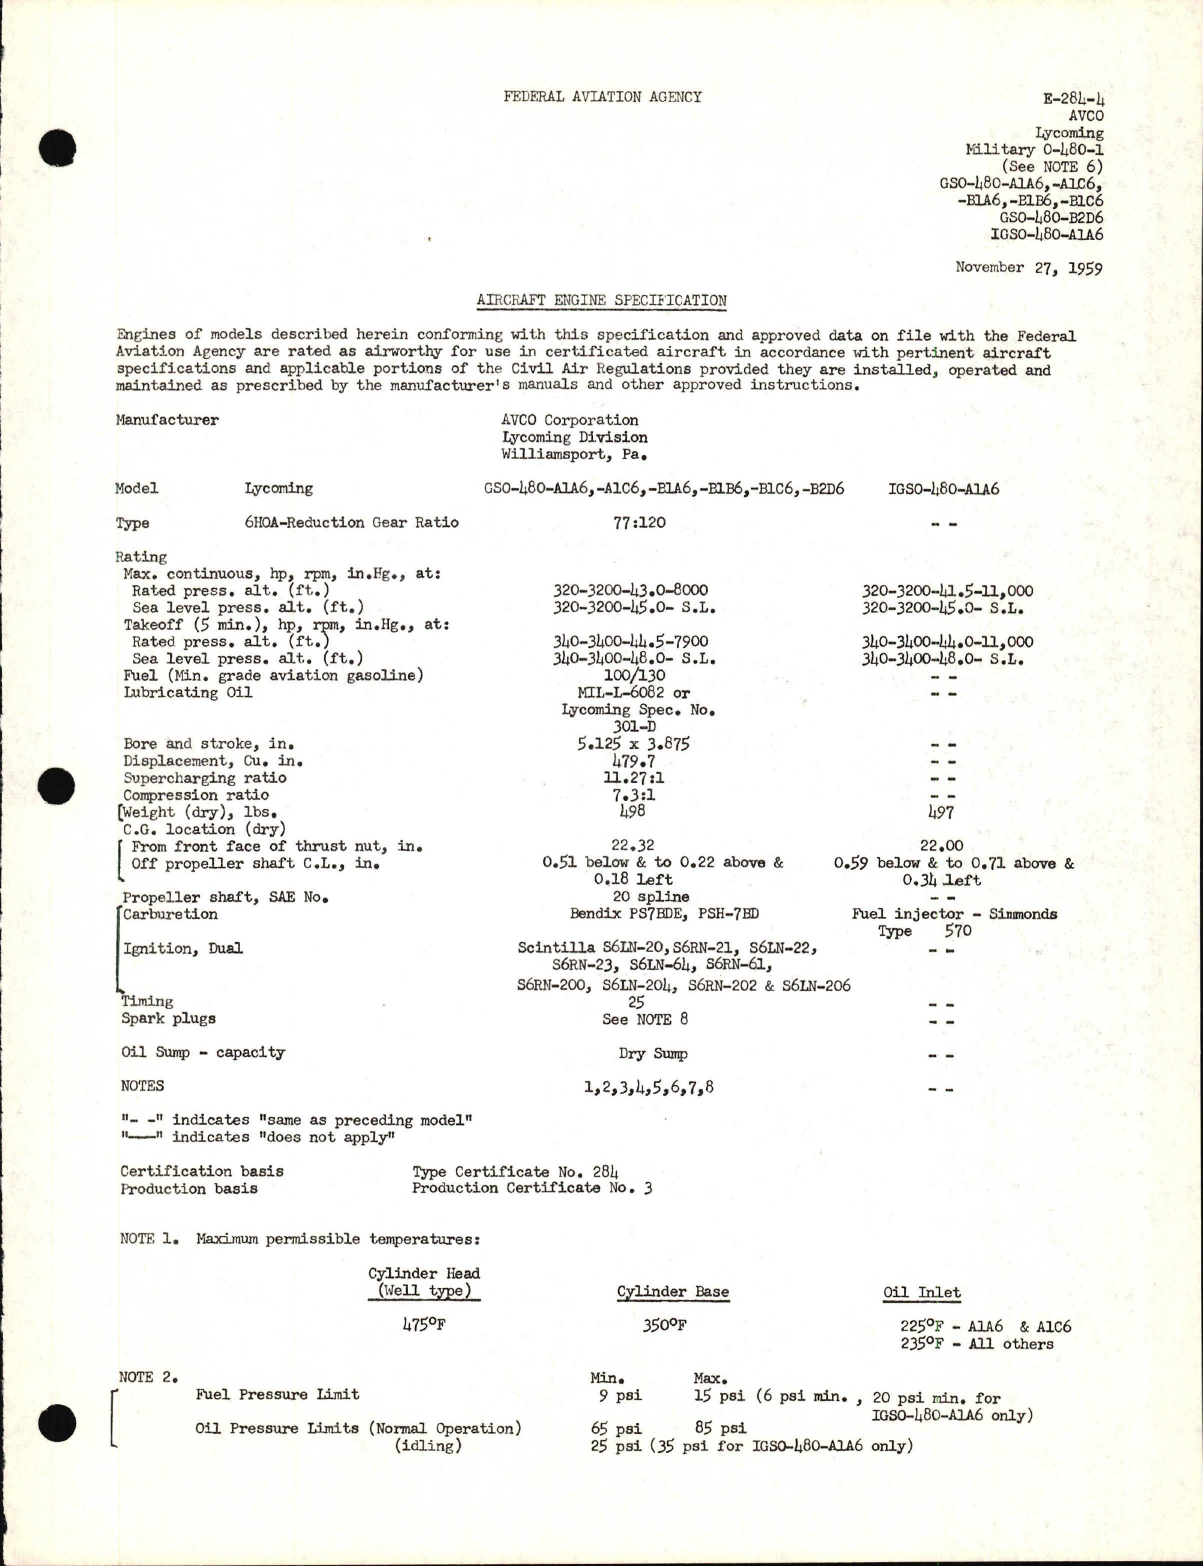 Sample page 1 from AirCorps Library document: O-480-1, GSO-480, and IGSO-480-A1A6